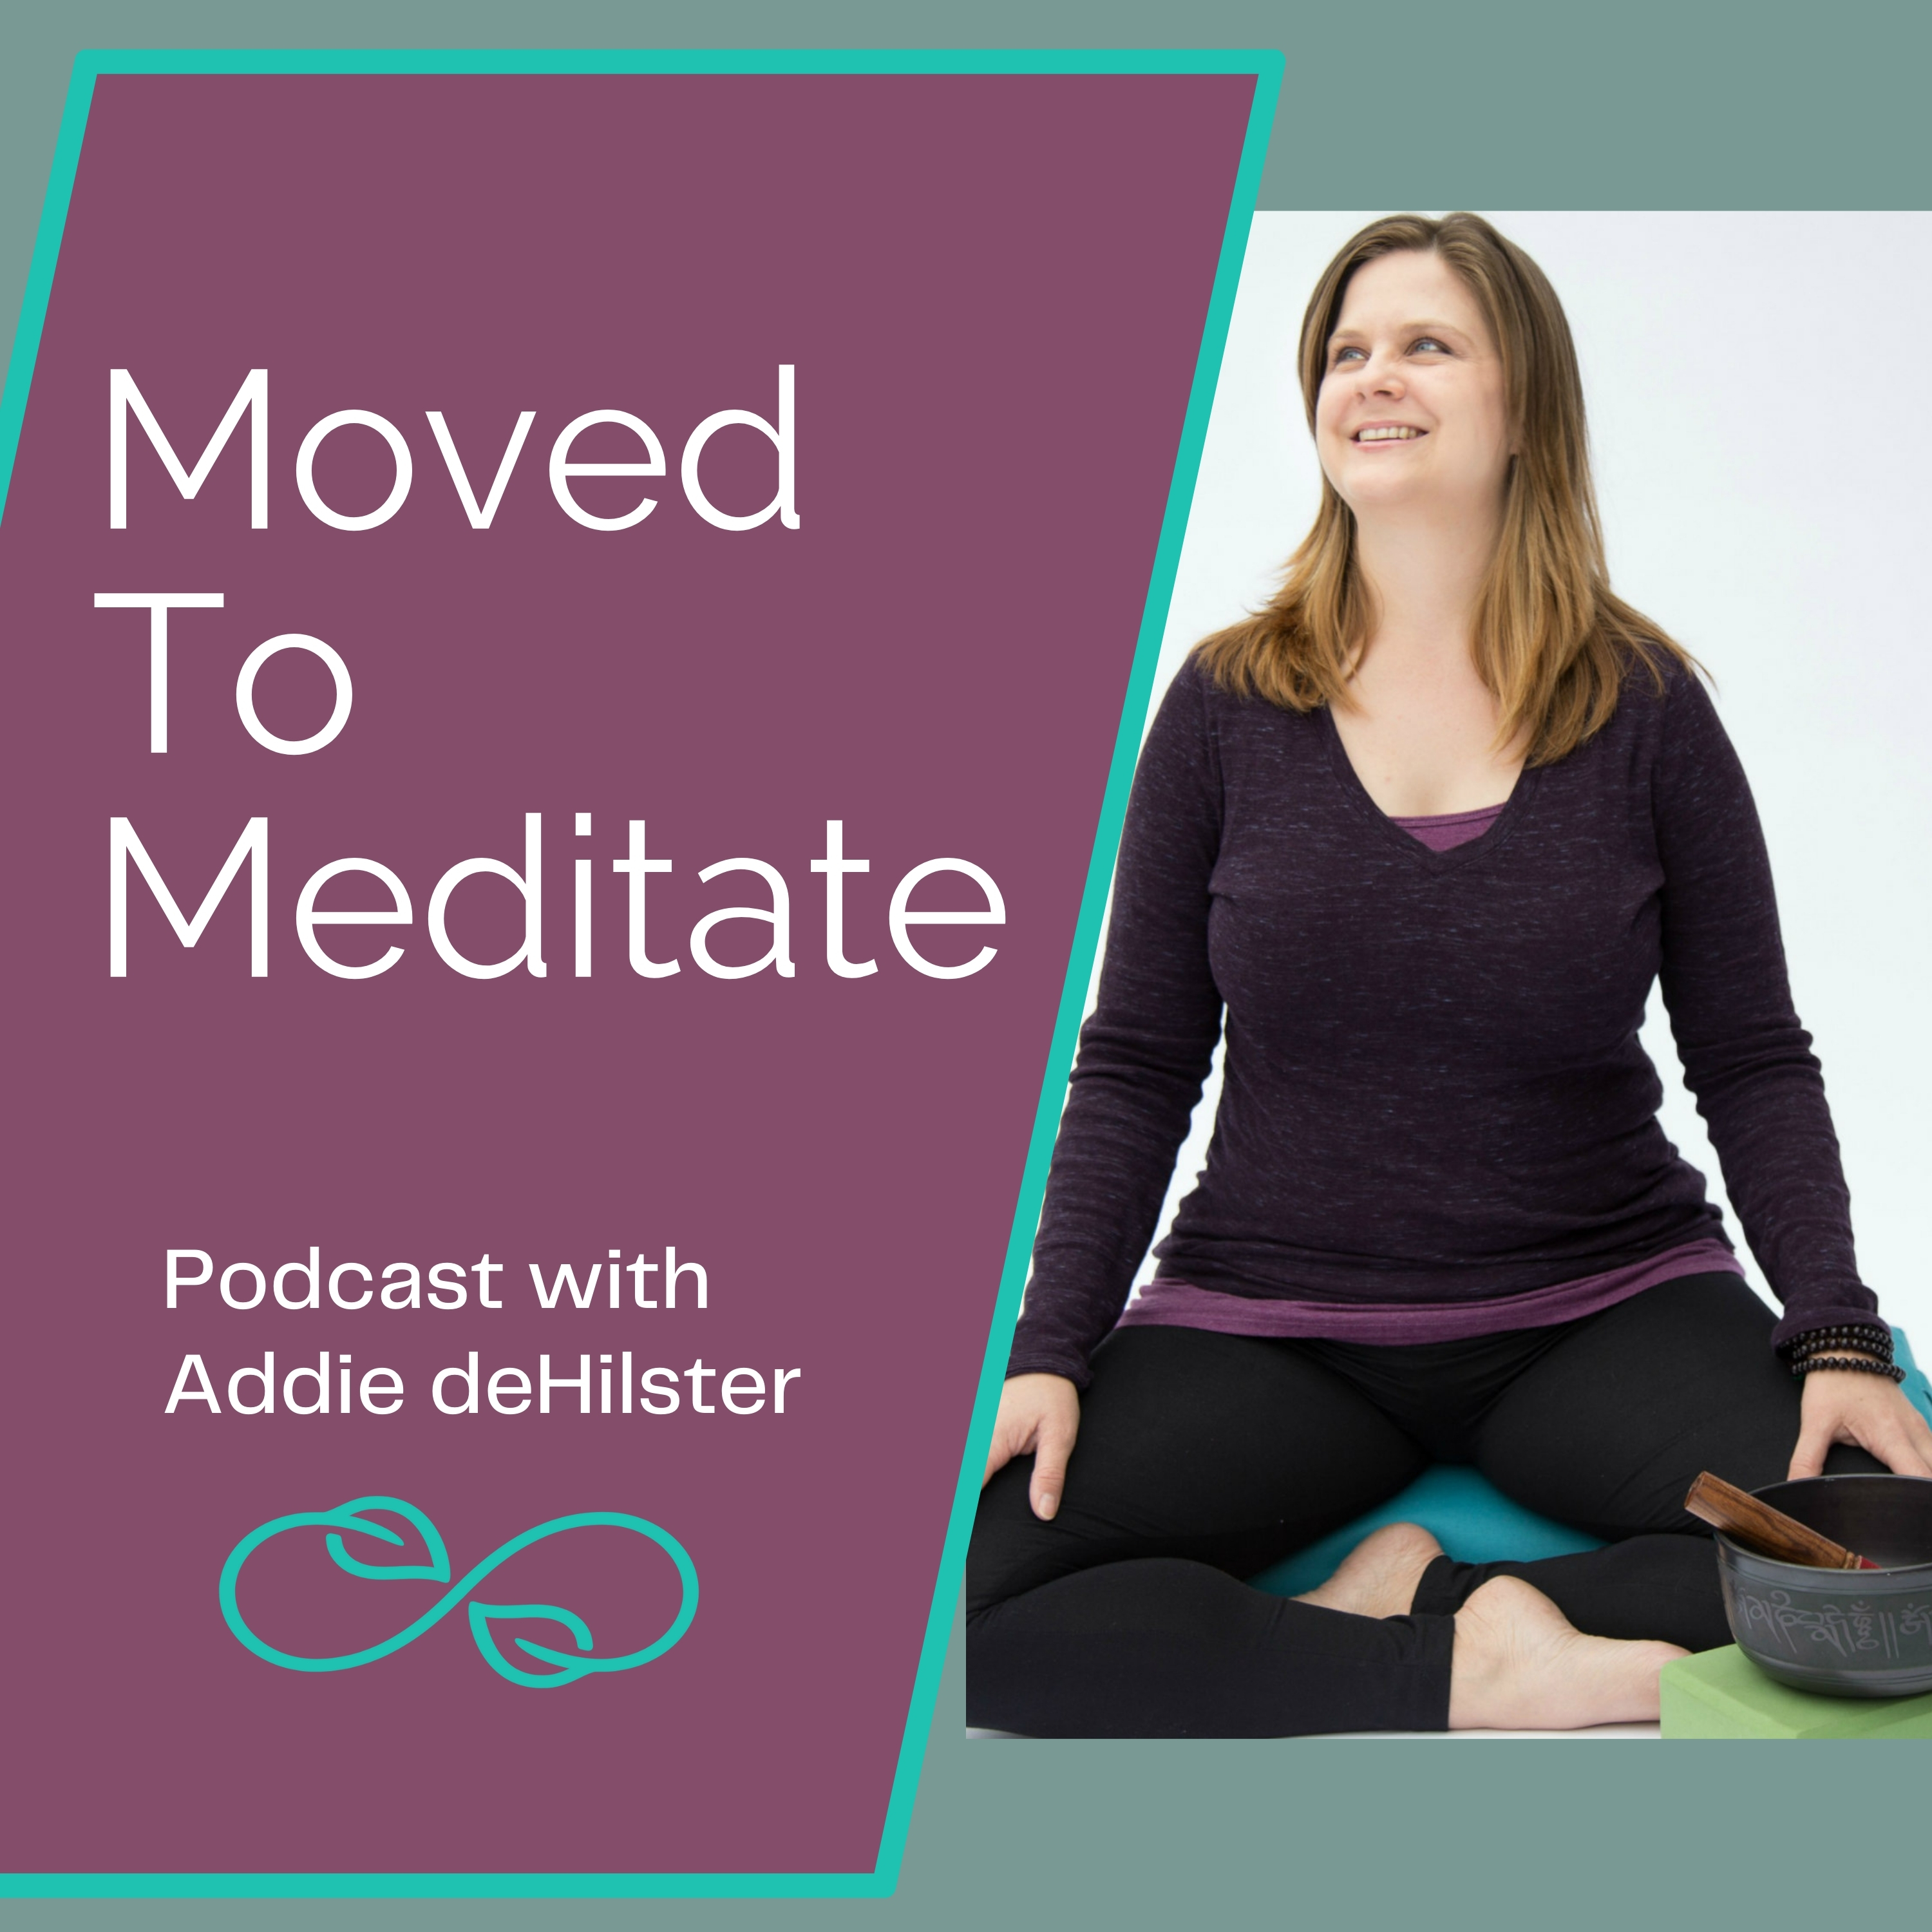 Episode 1 – Moved To Meditate Podcast